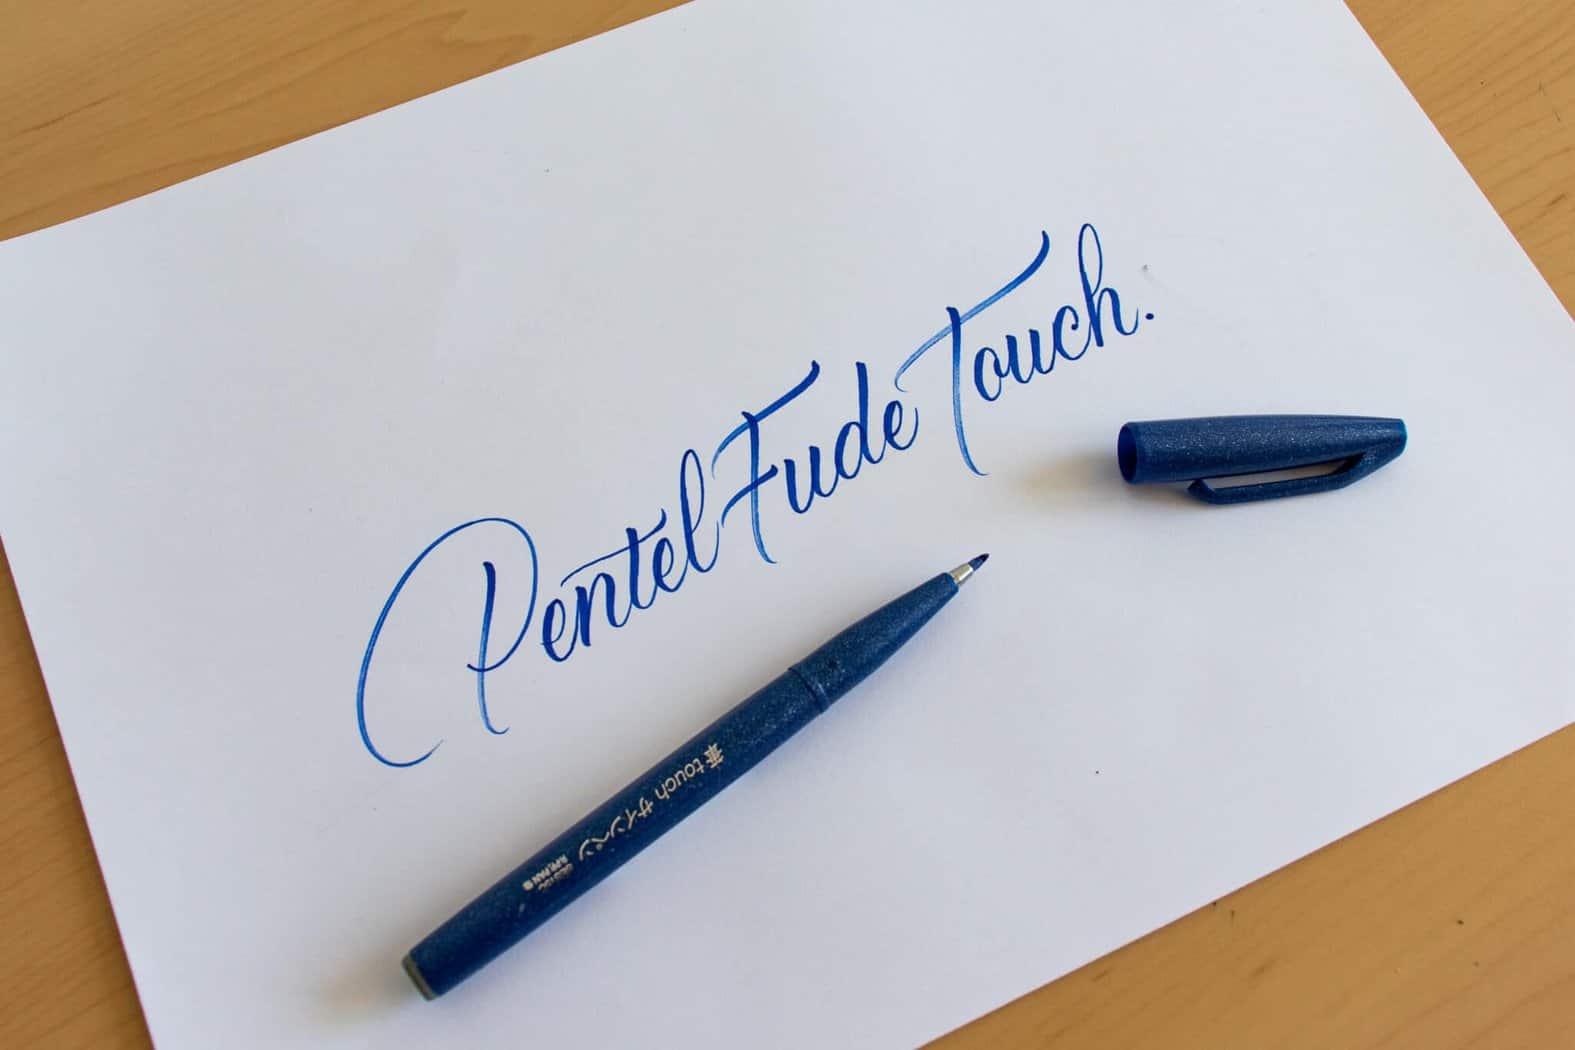 6 Brush Pens For Lettering Beginners - Happy Hands Project